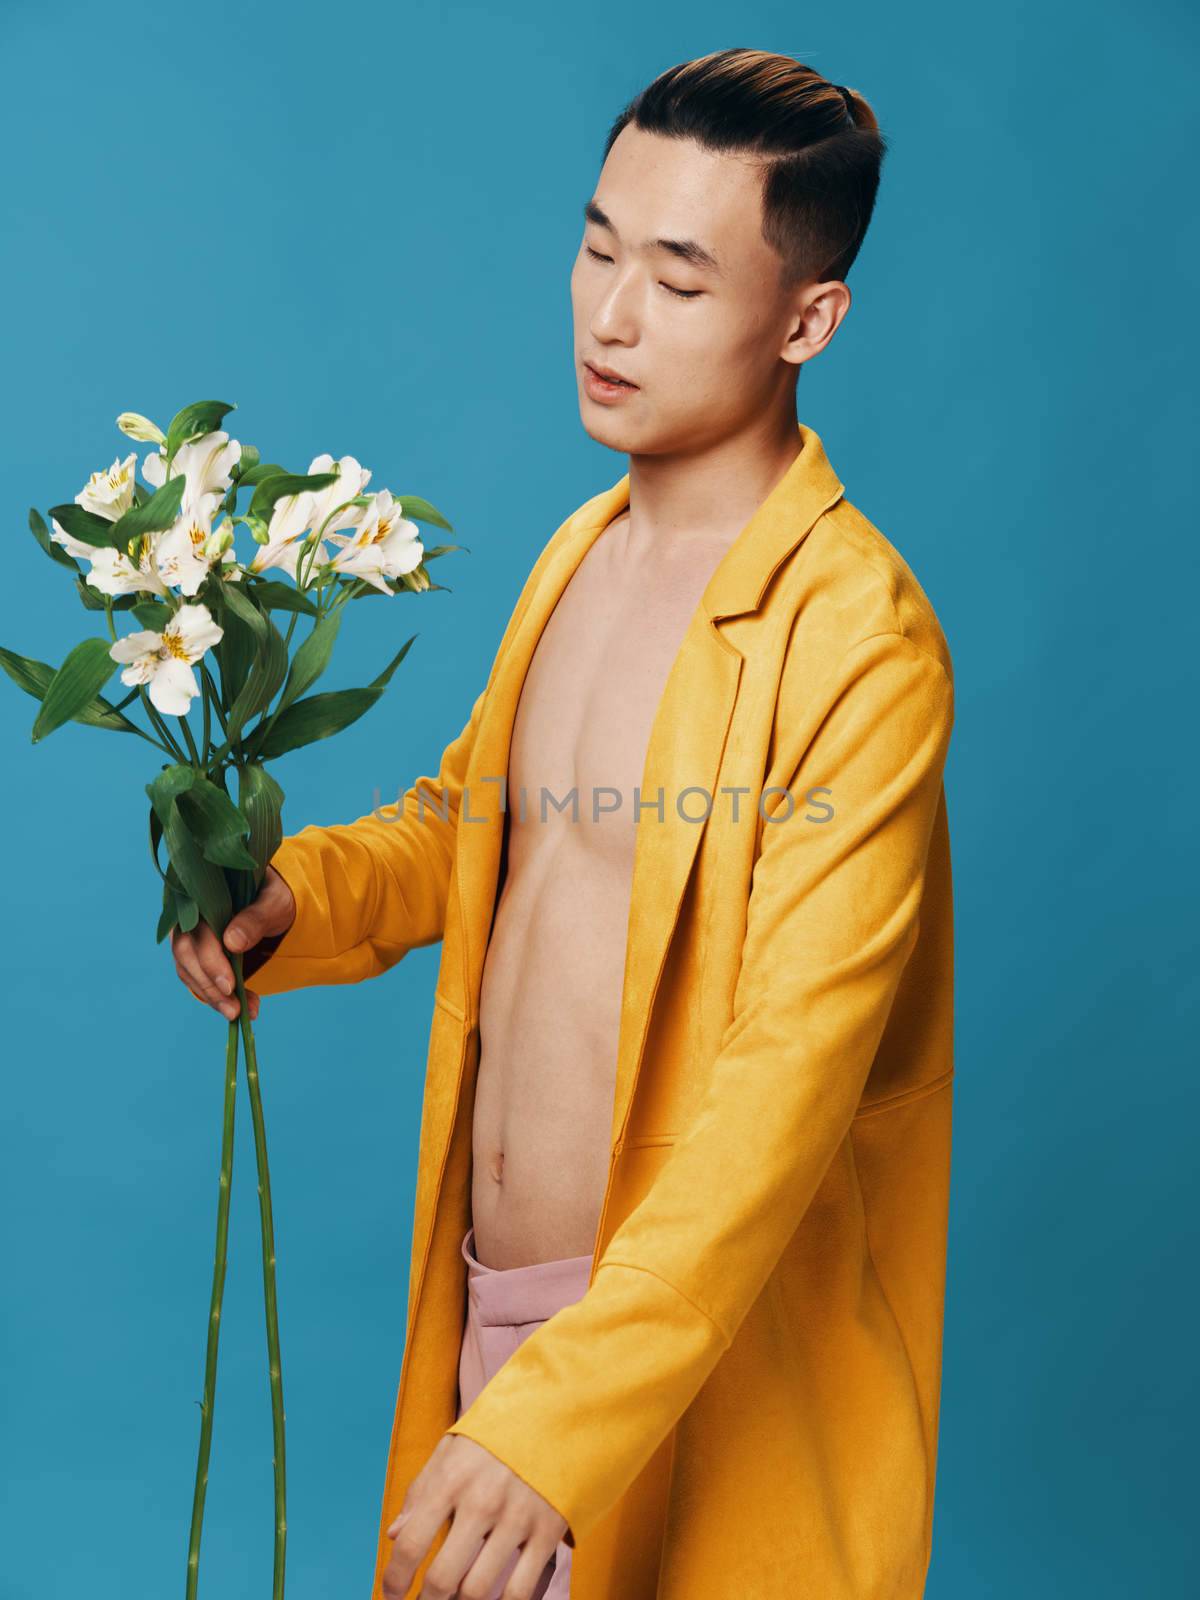 Man with a bouquet of white flowers on a blue background romance gifts nude torso jacket. High quality photo